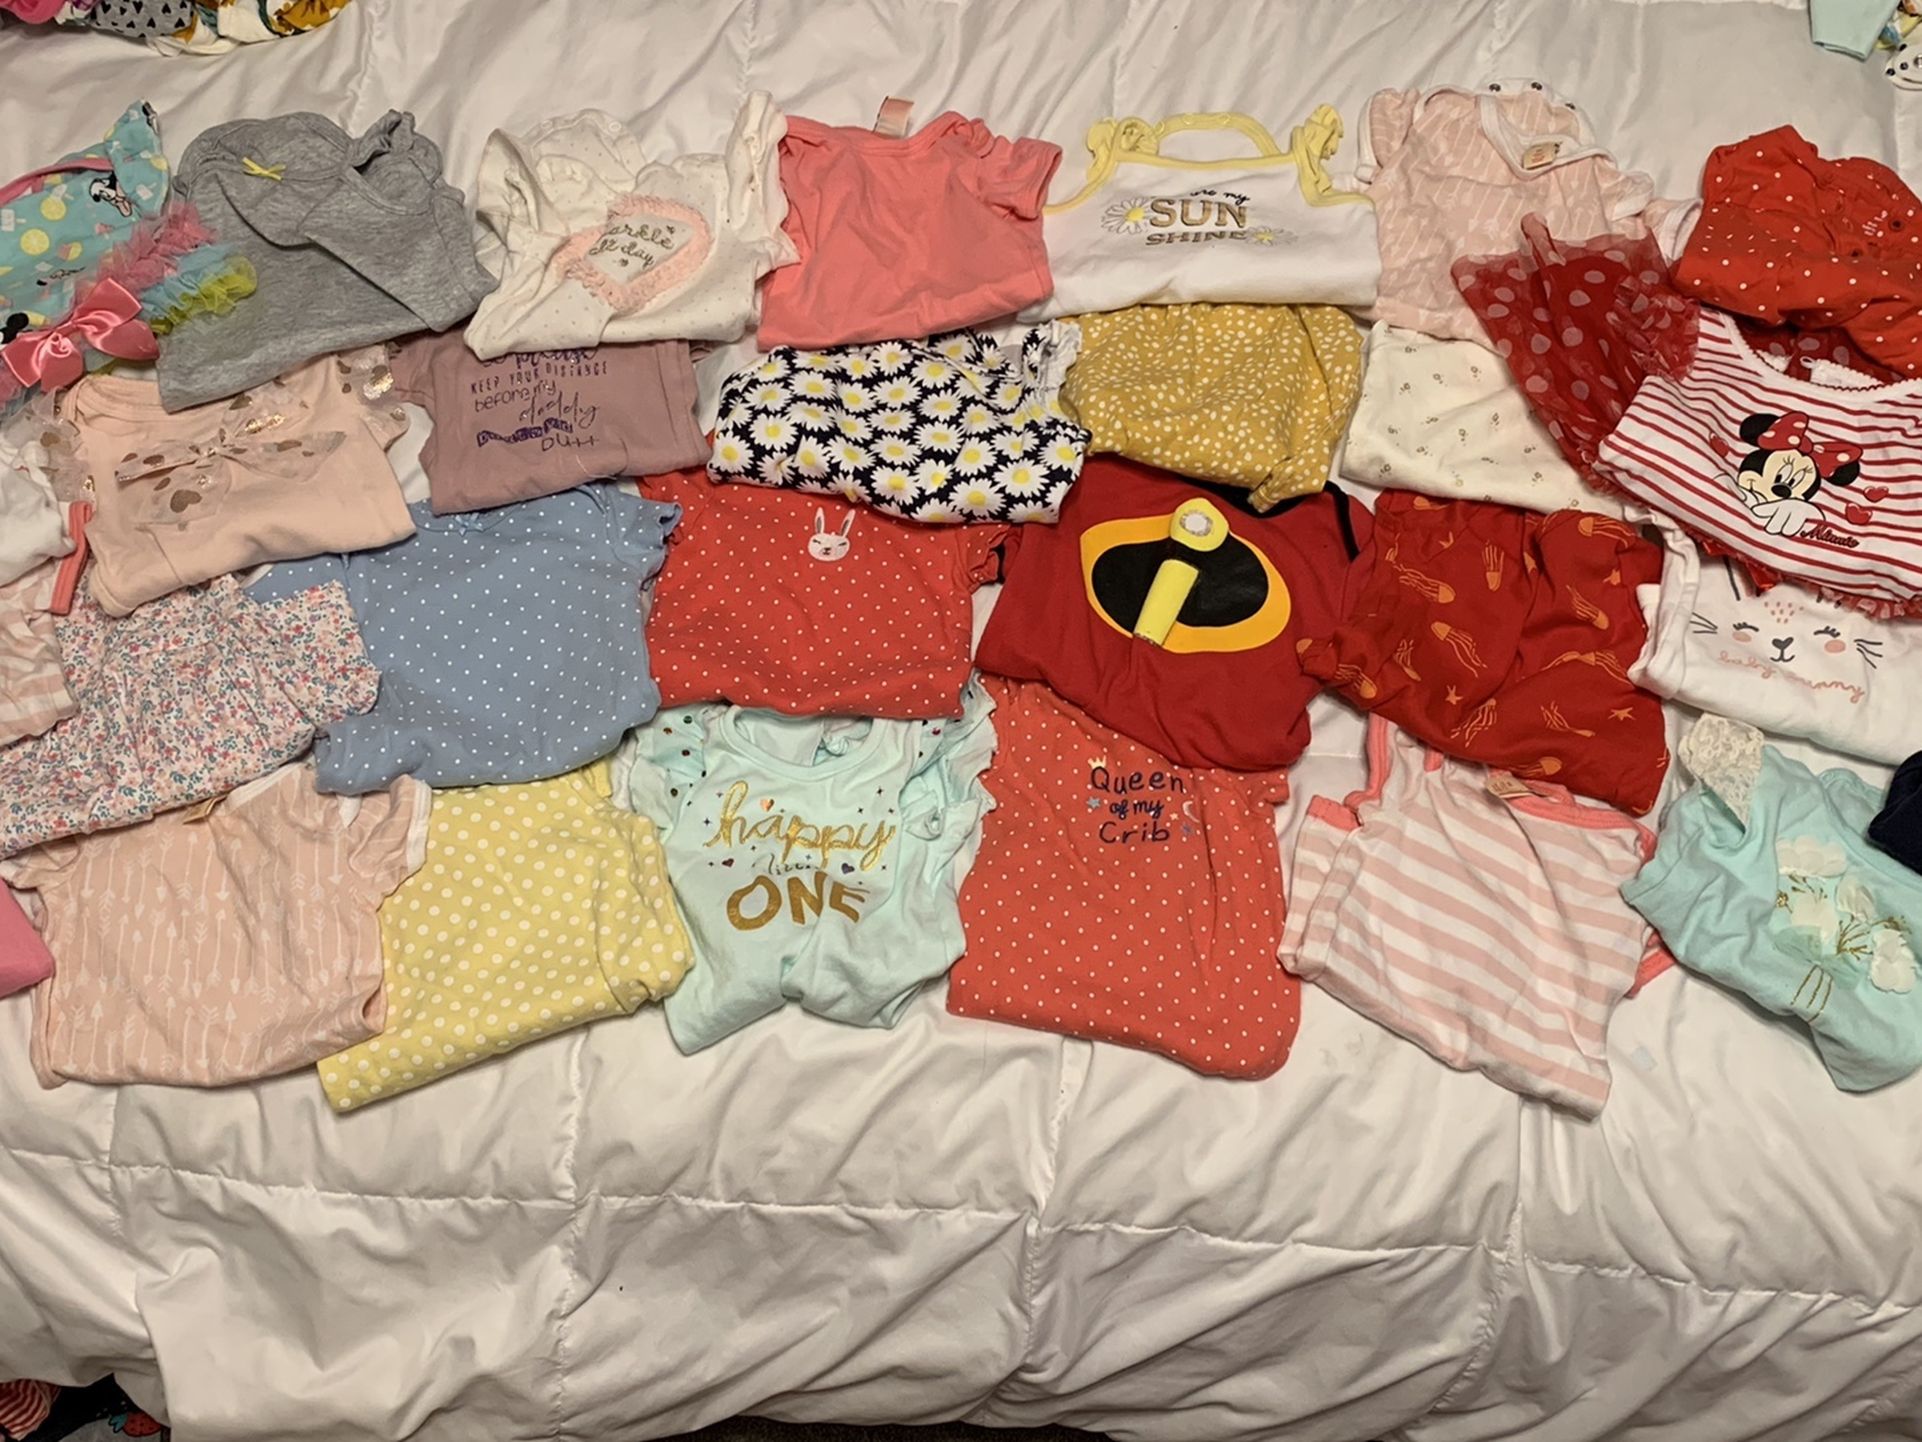 6-9 Months Baby Girl Clothes